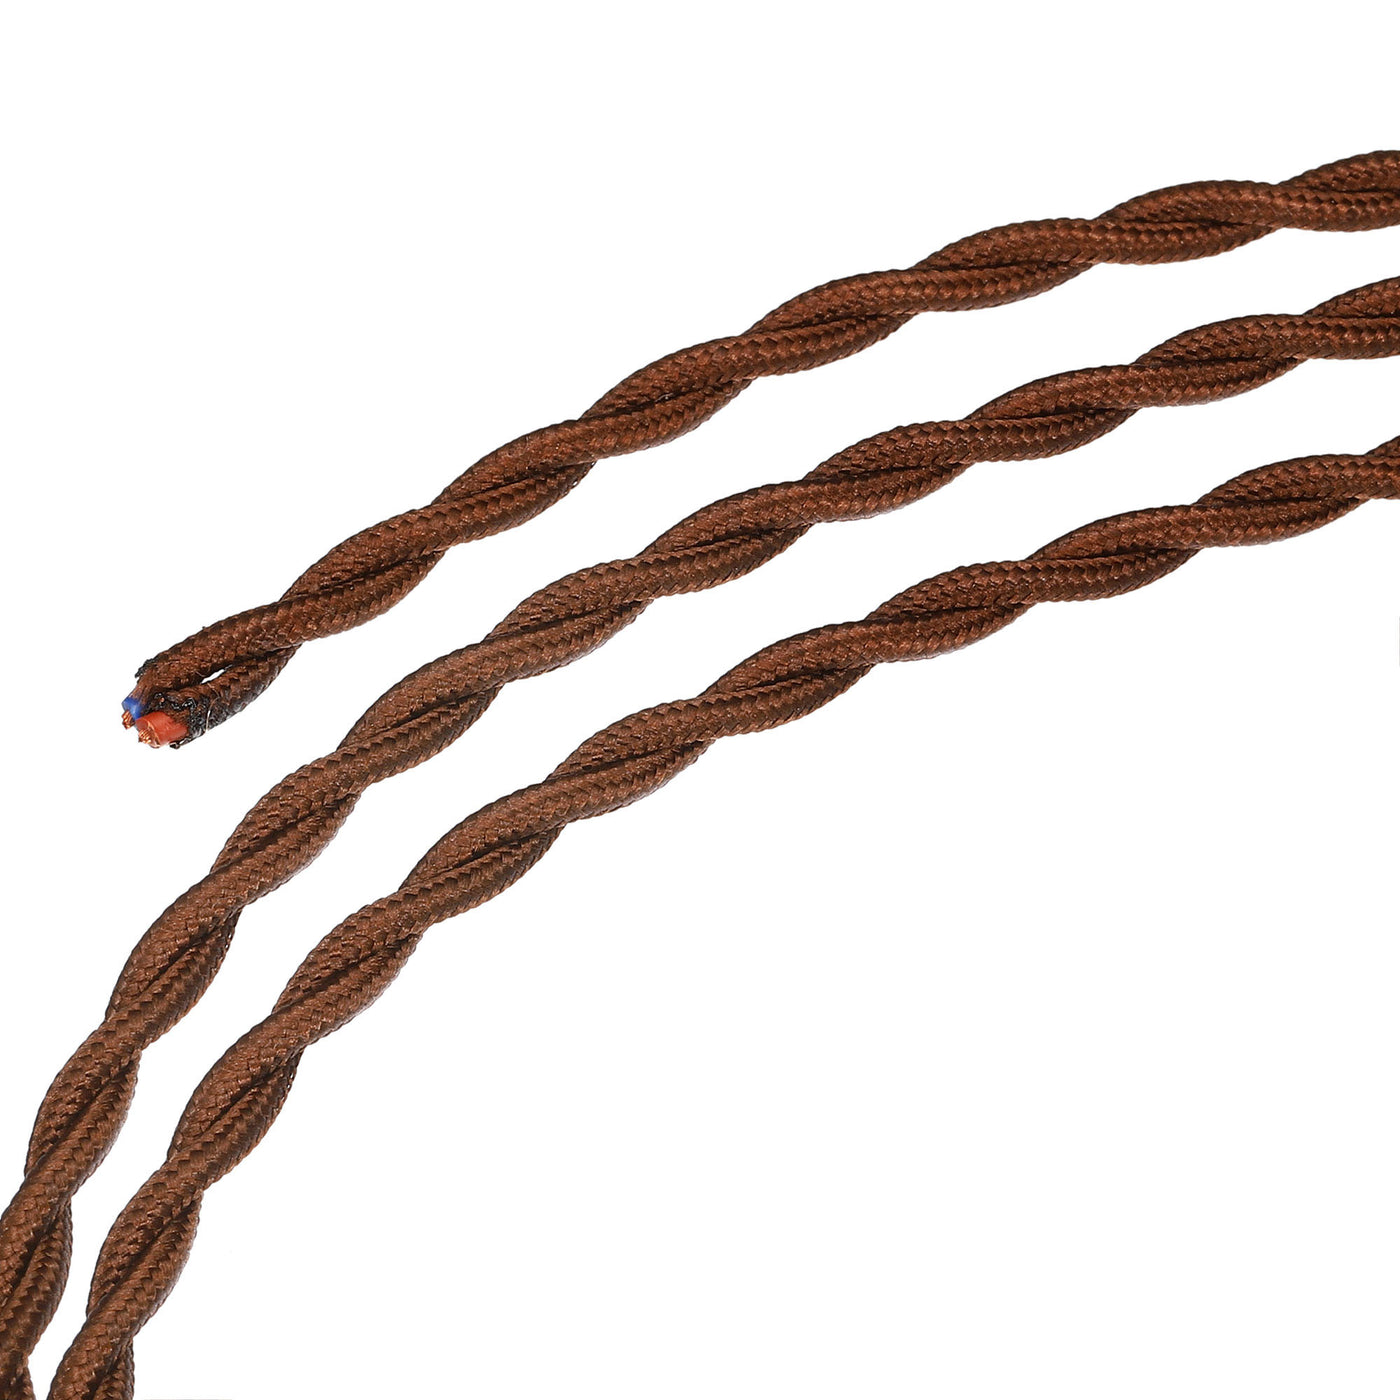 Harfington Twisted Cloth Covered Wire 2 Core 18AWG 10m/32.8ft,Electrical Cable,Brown